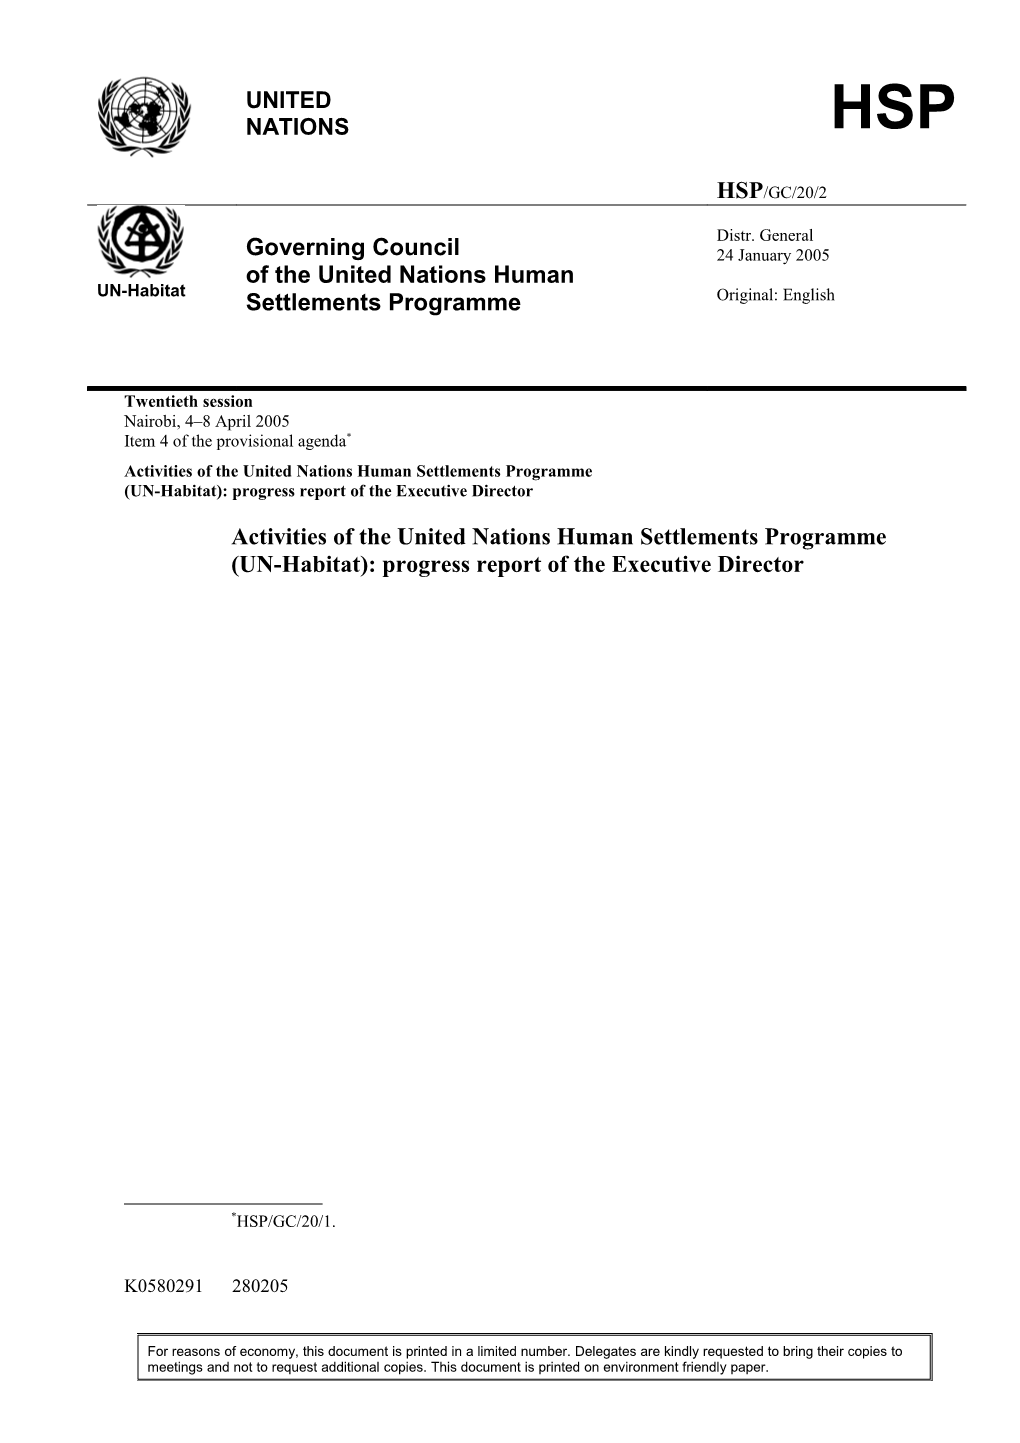 Activities of the United Nations Human Settlements Programme